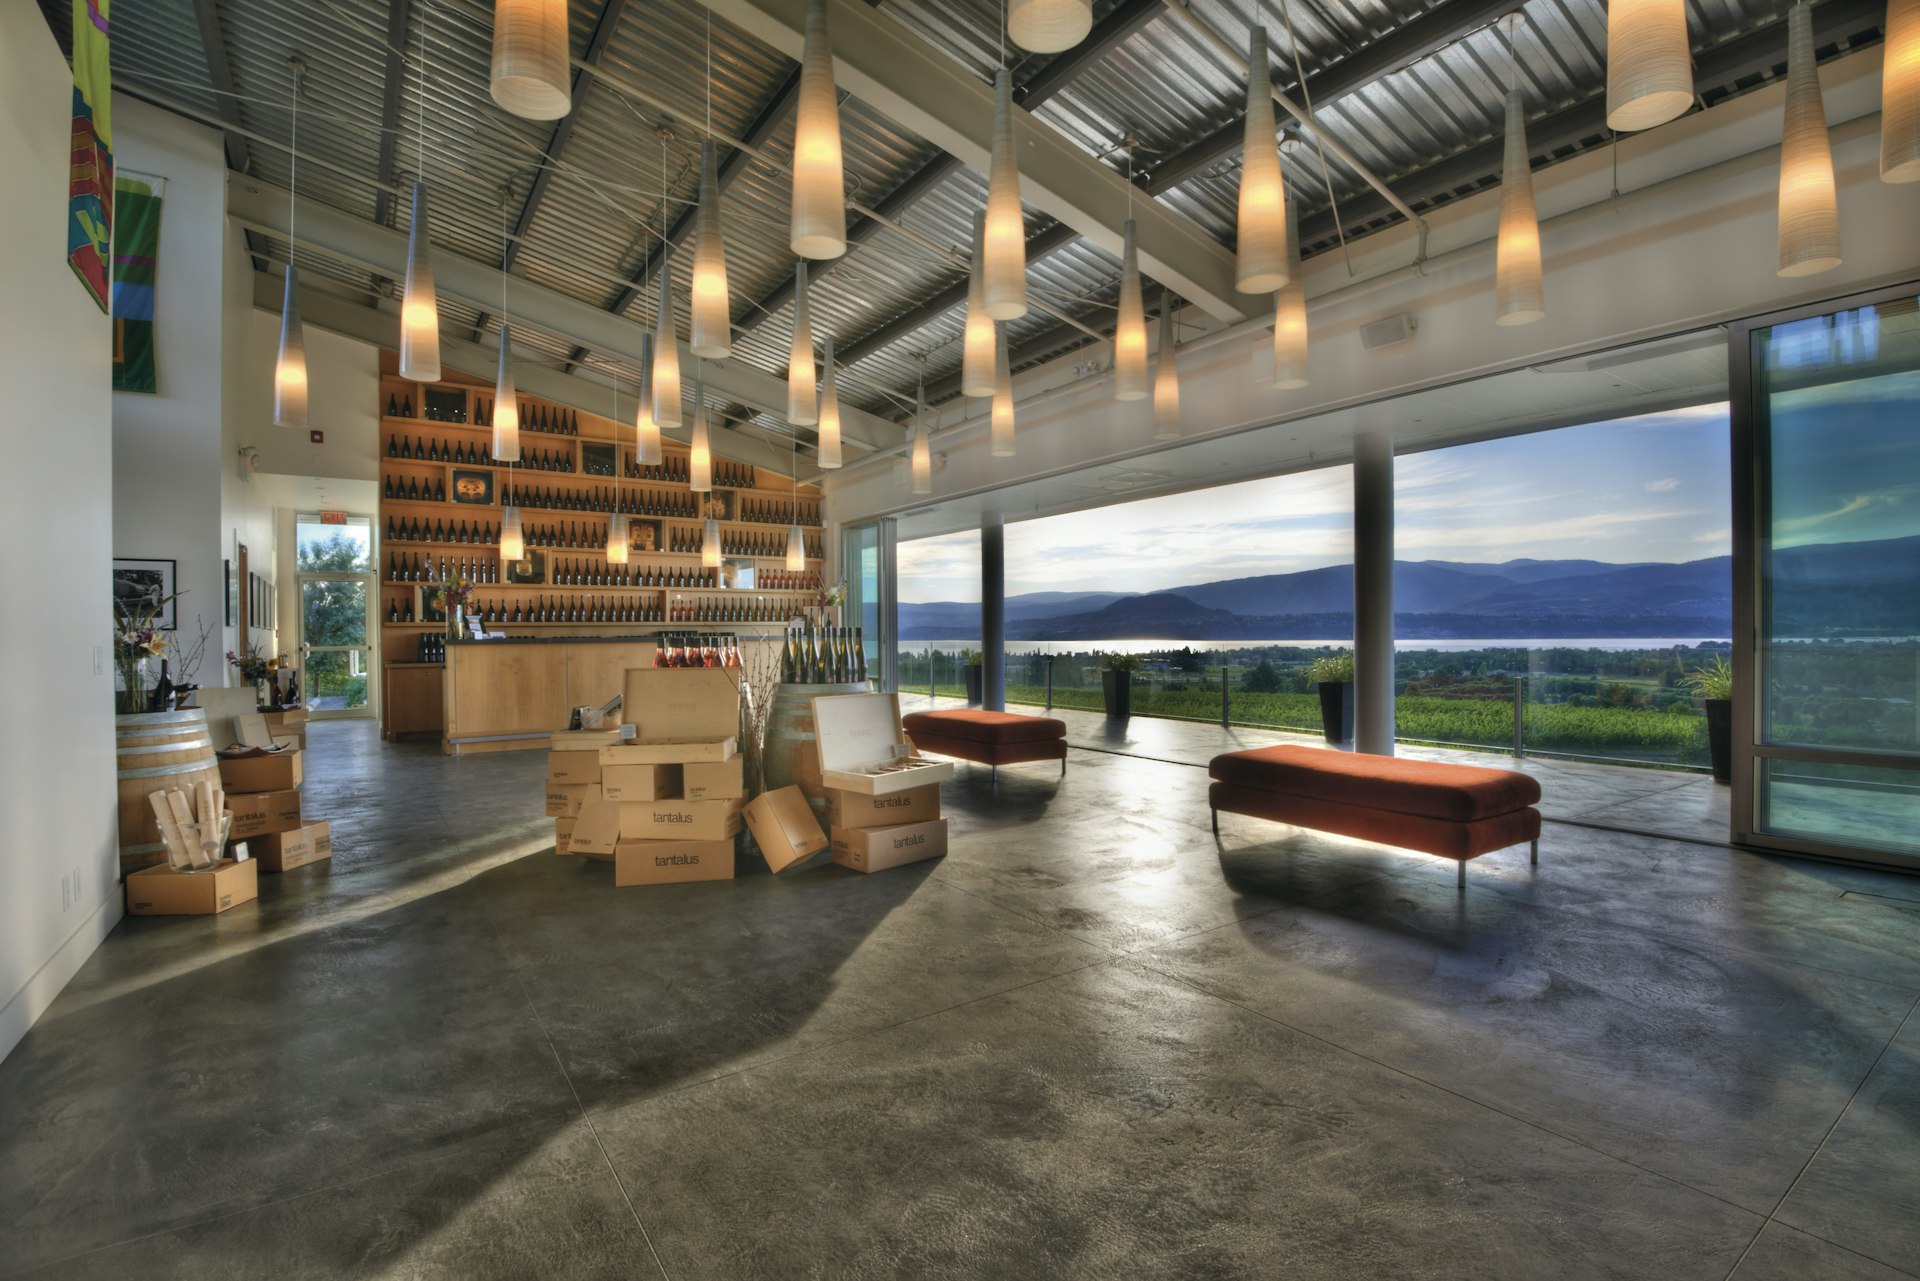 A large room with a bar at one end with shelves full of wine bottles. The floor-to-ceiling windows look out over vineyards